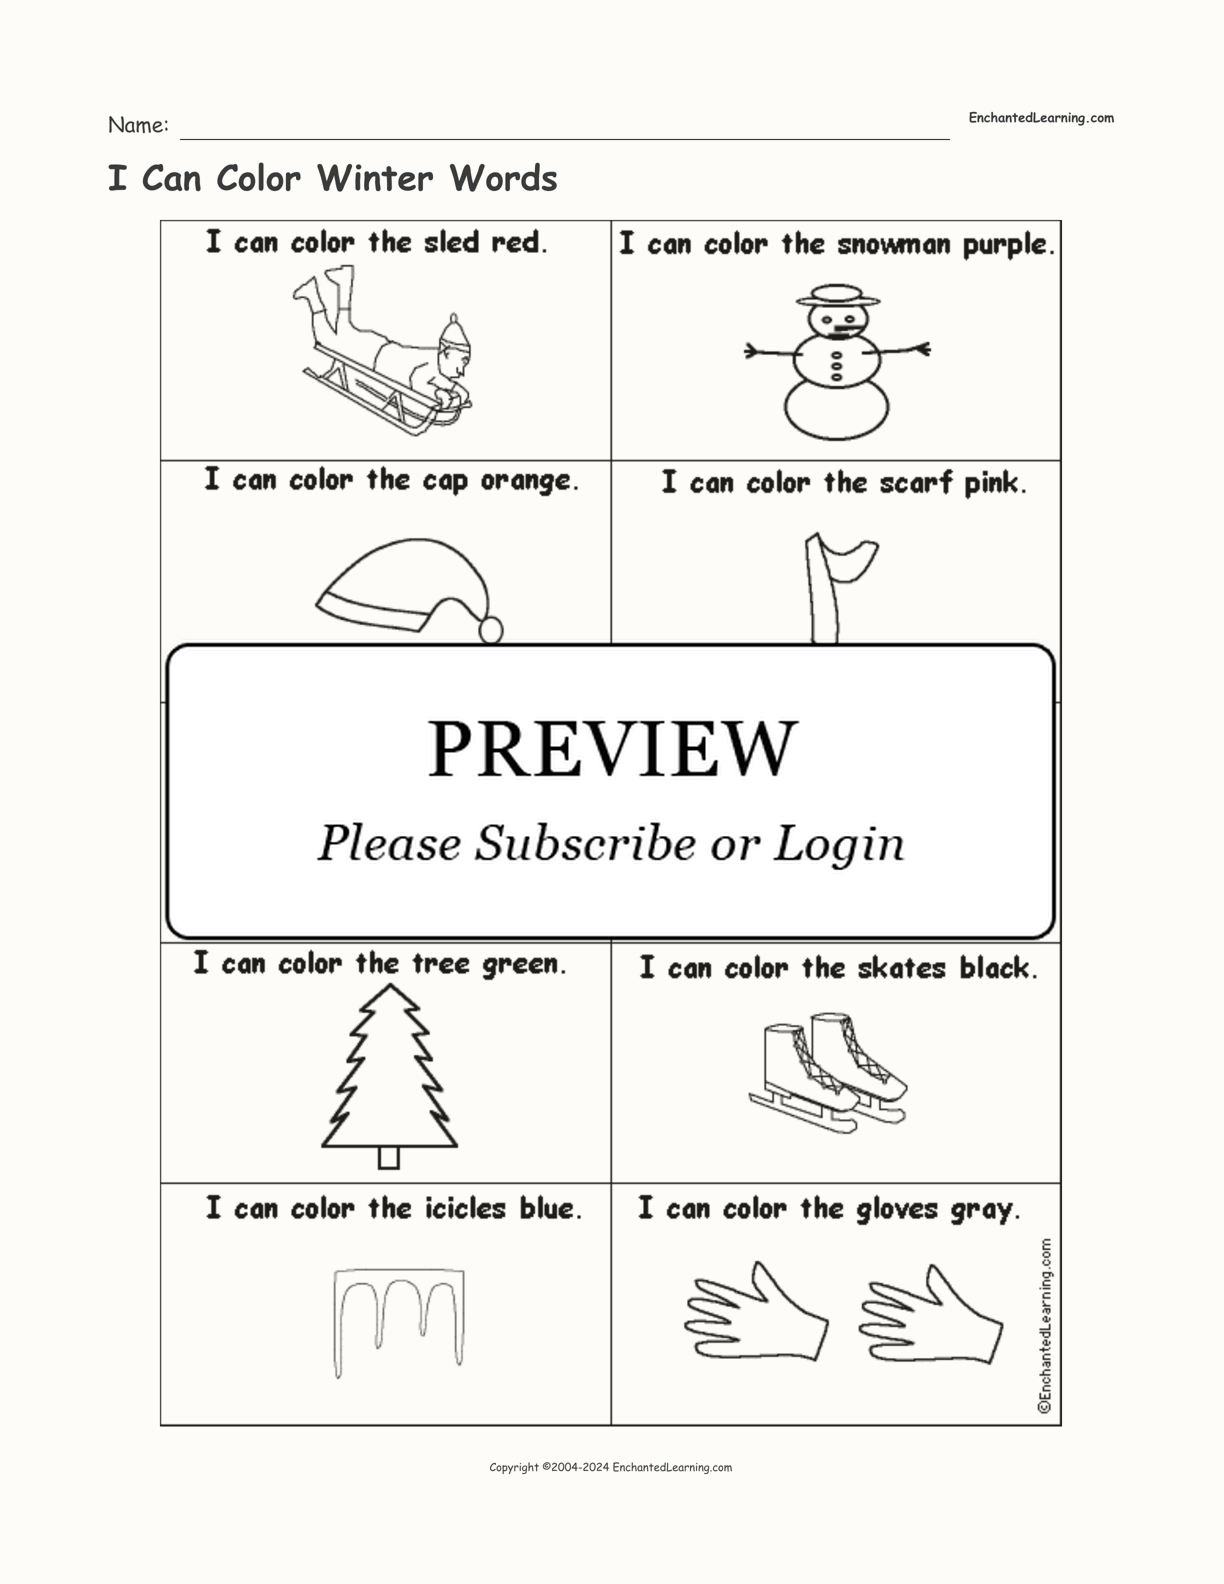 I Can Color Winter Words interactive worksheet page 1